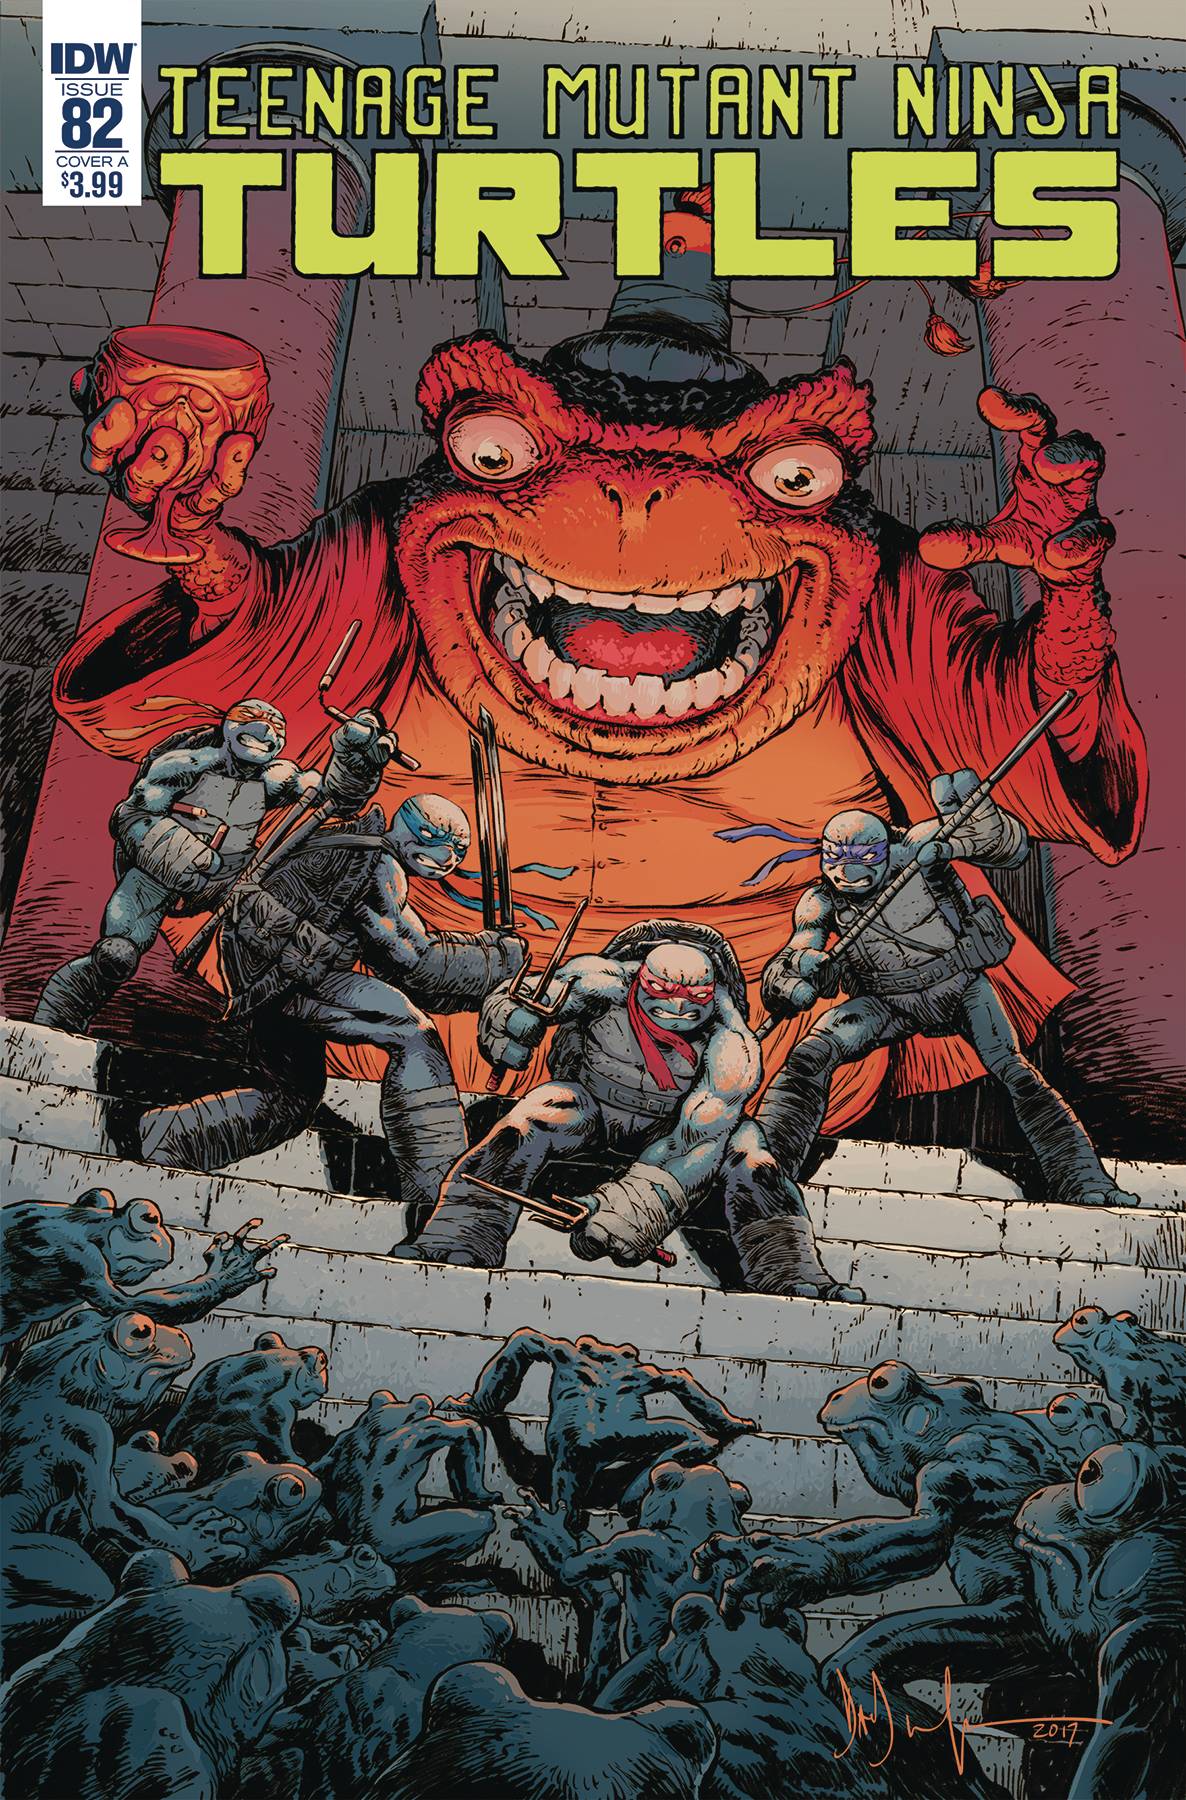 Teenage Mutant Ninja Turtles Ongoing #82 Cover A Wachter (2011)